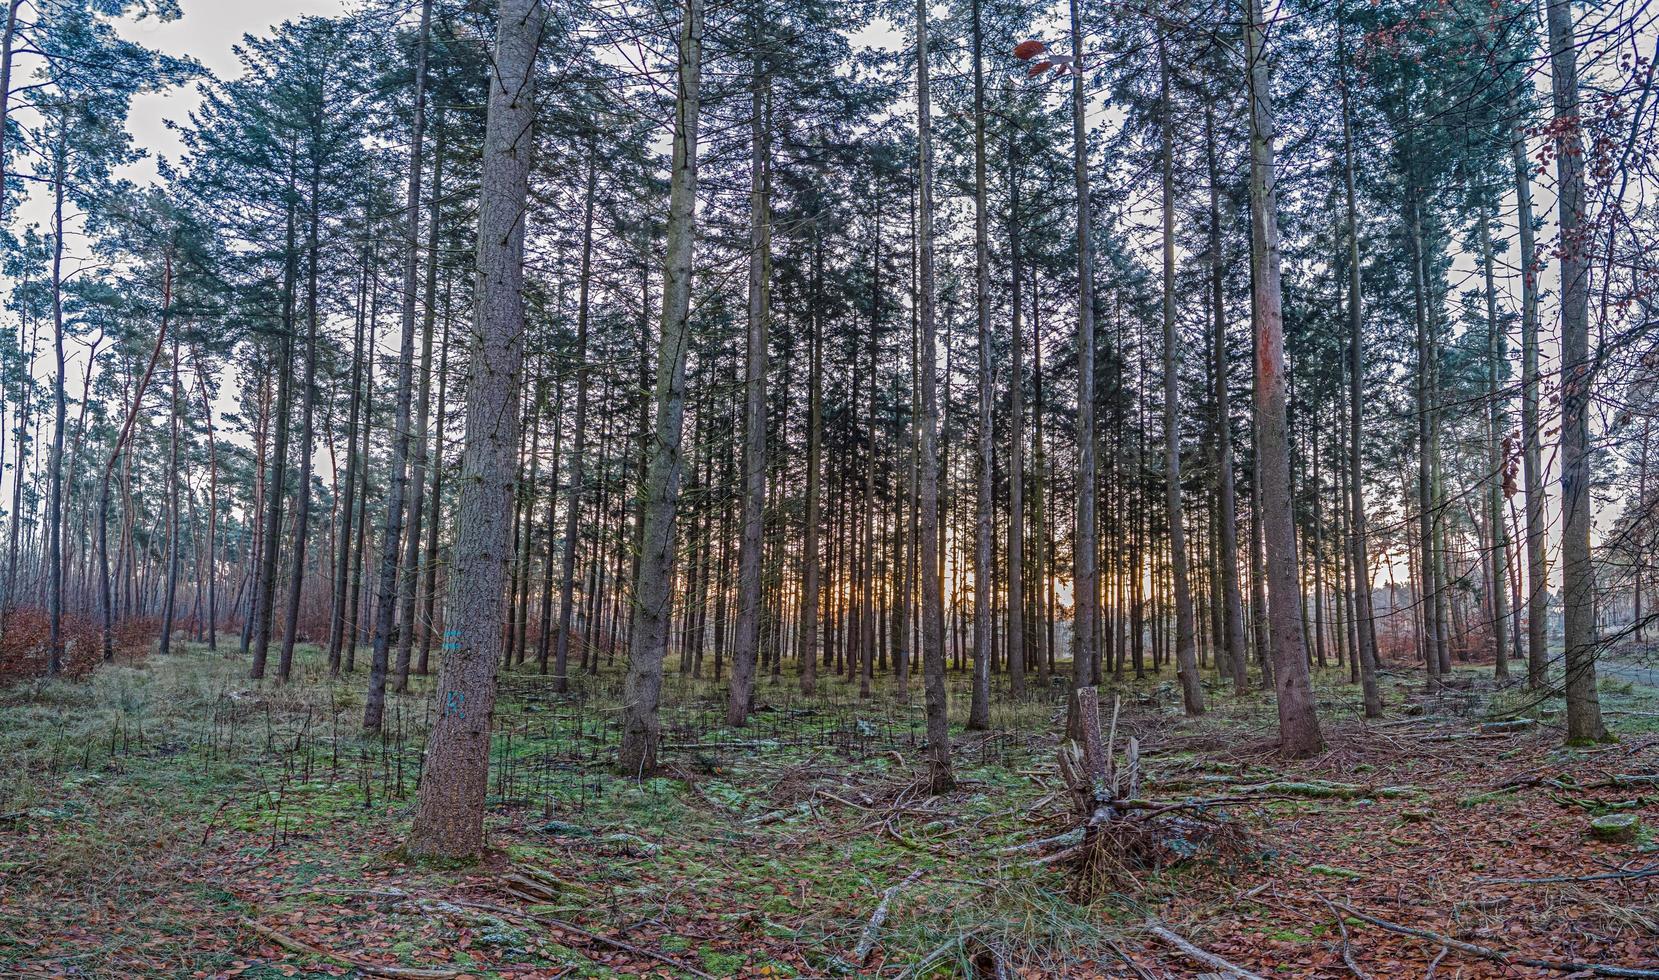 Image of a footpath through a wintry forest photo